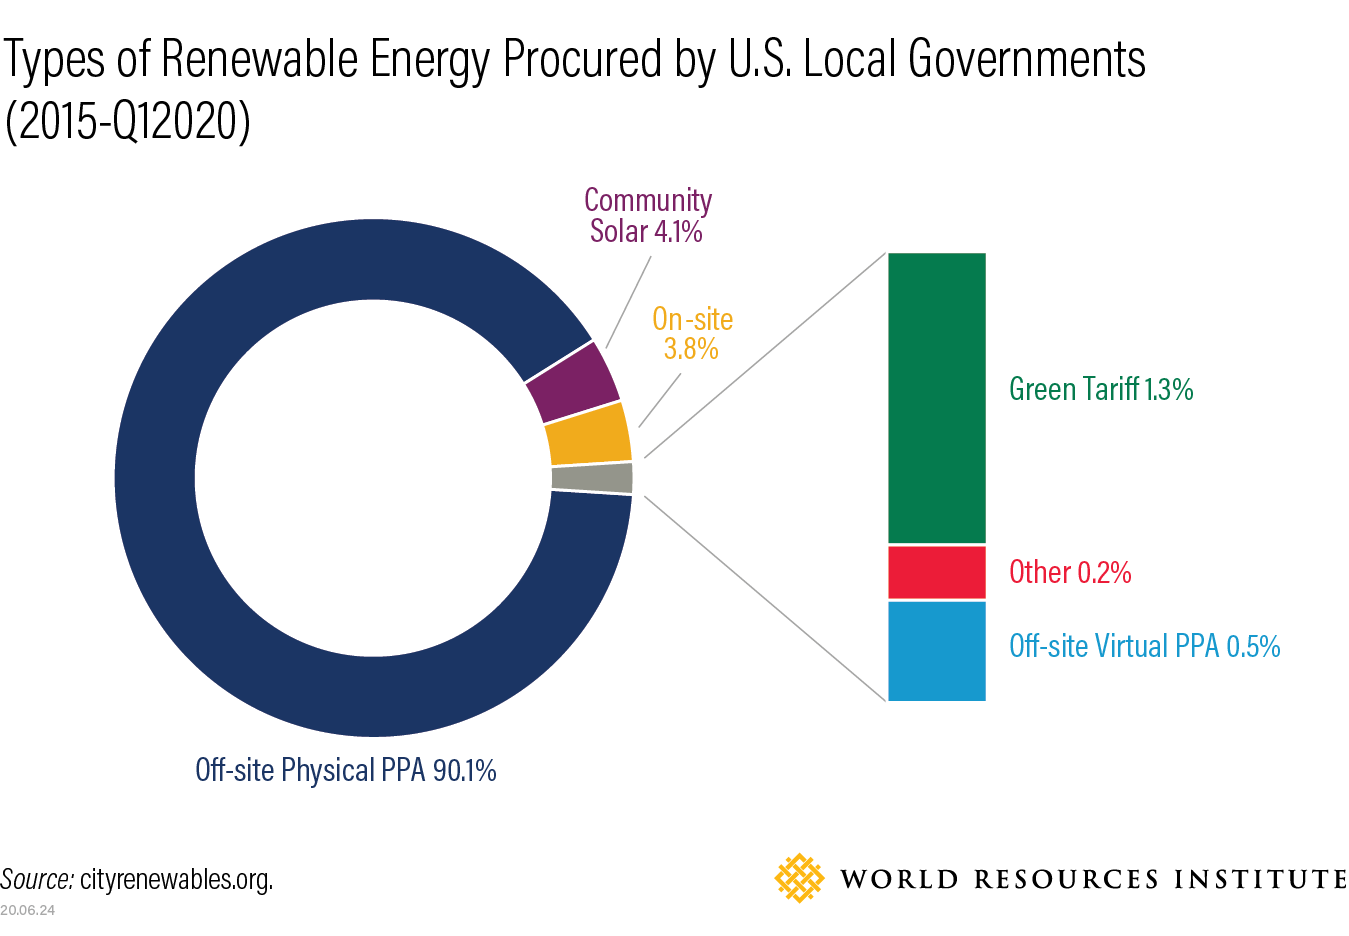 Graph shows the types of renewable energy procured by U.S. local governments